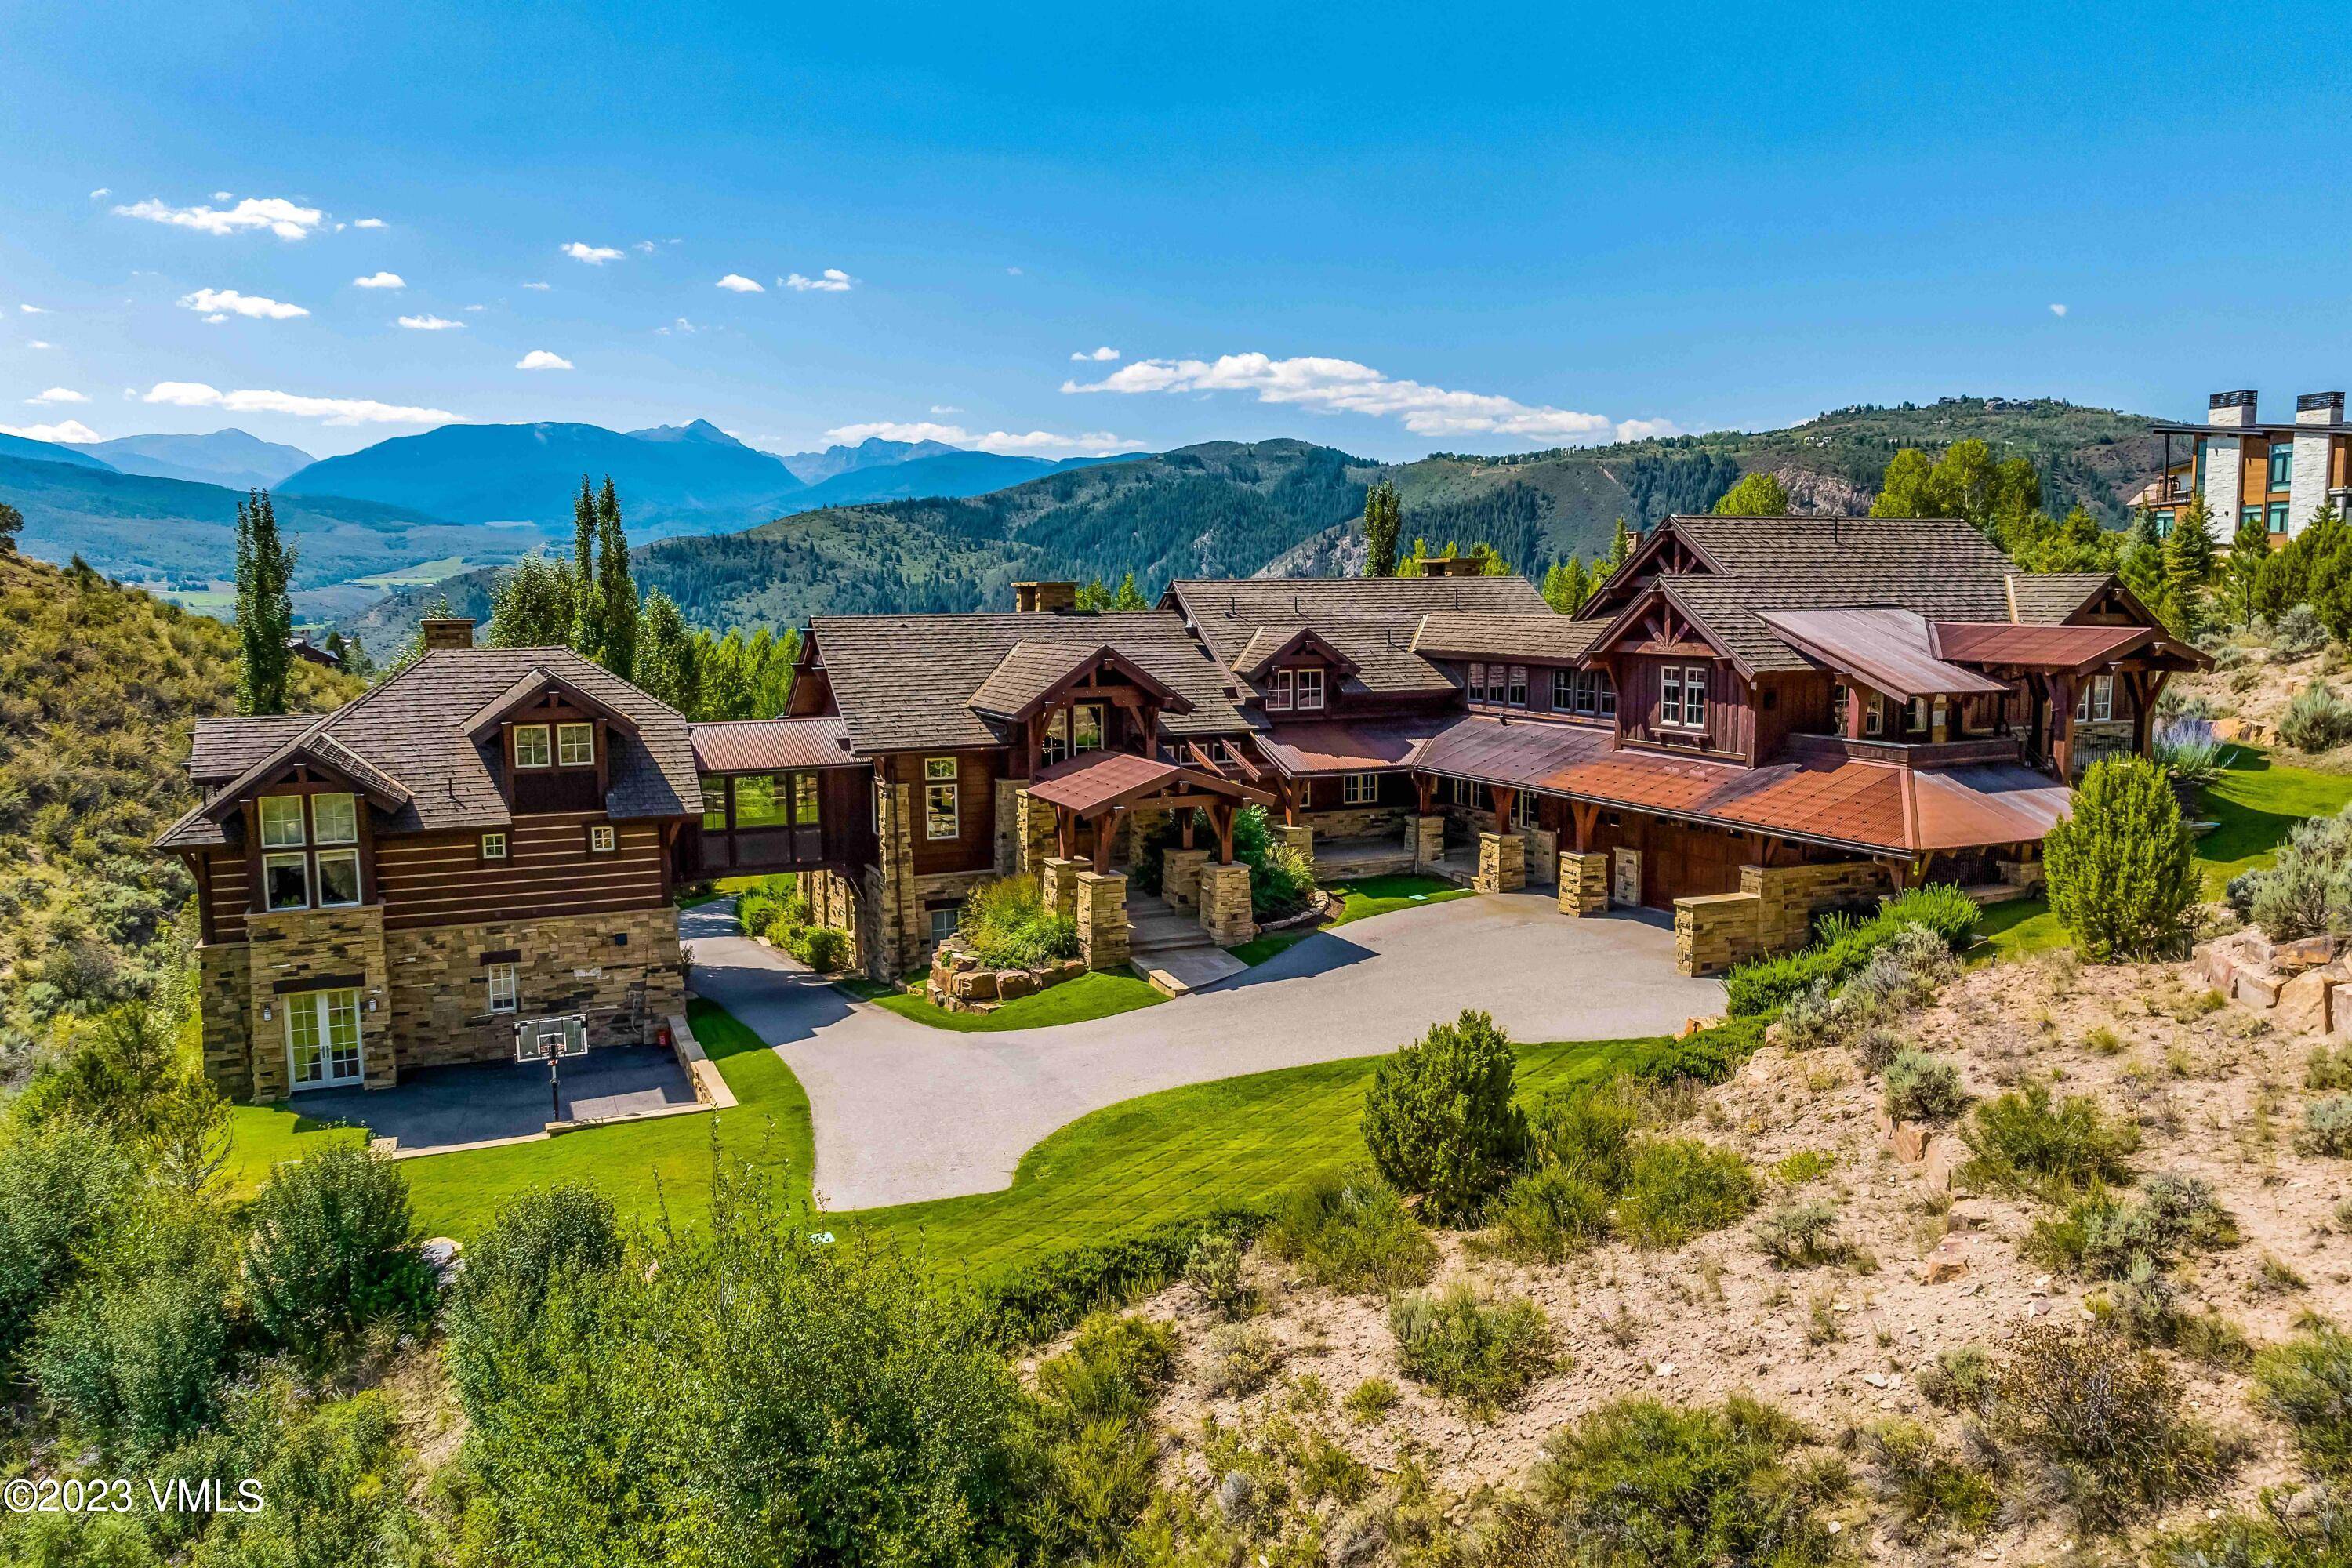 Nestled within the Cordillera Valley Club's gates, this remarkable estate occupies 1.